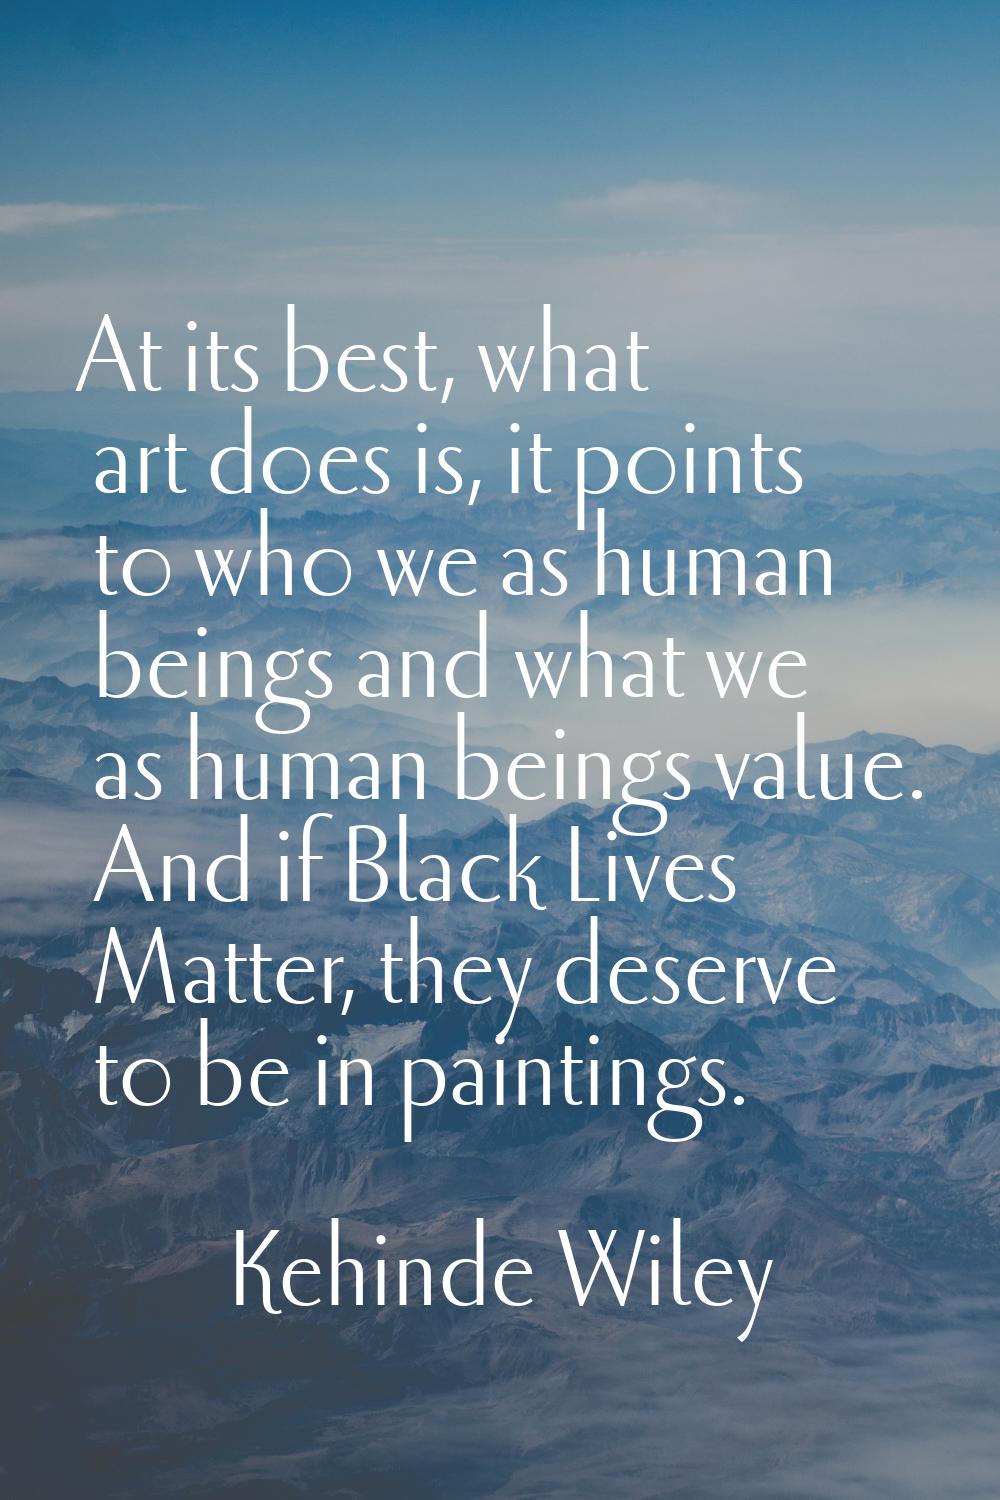 At its best, what art does is, it points to who we as human beings and what we as human beings valu